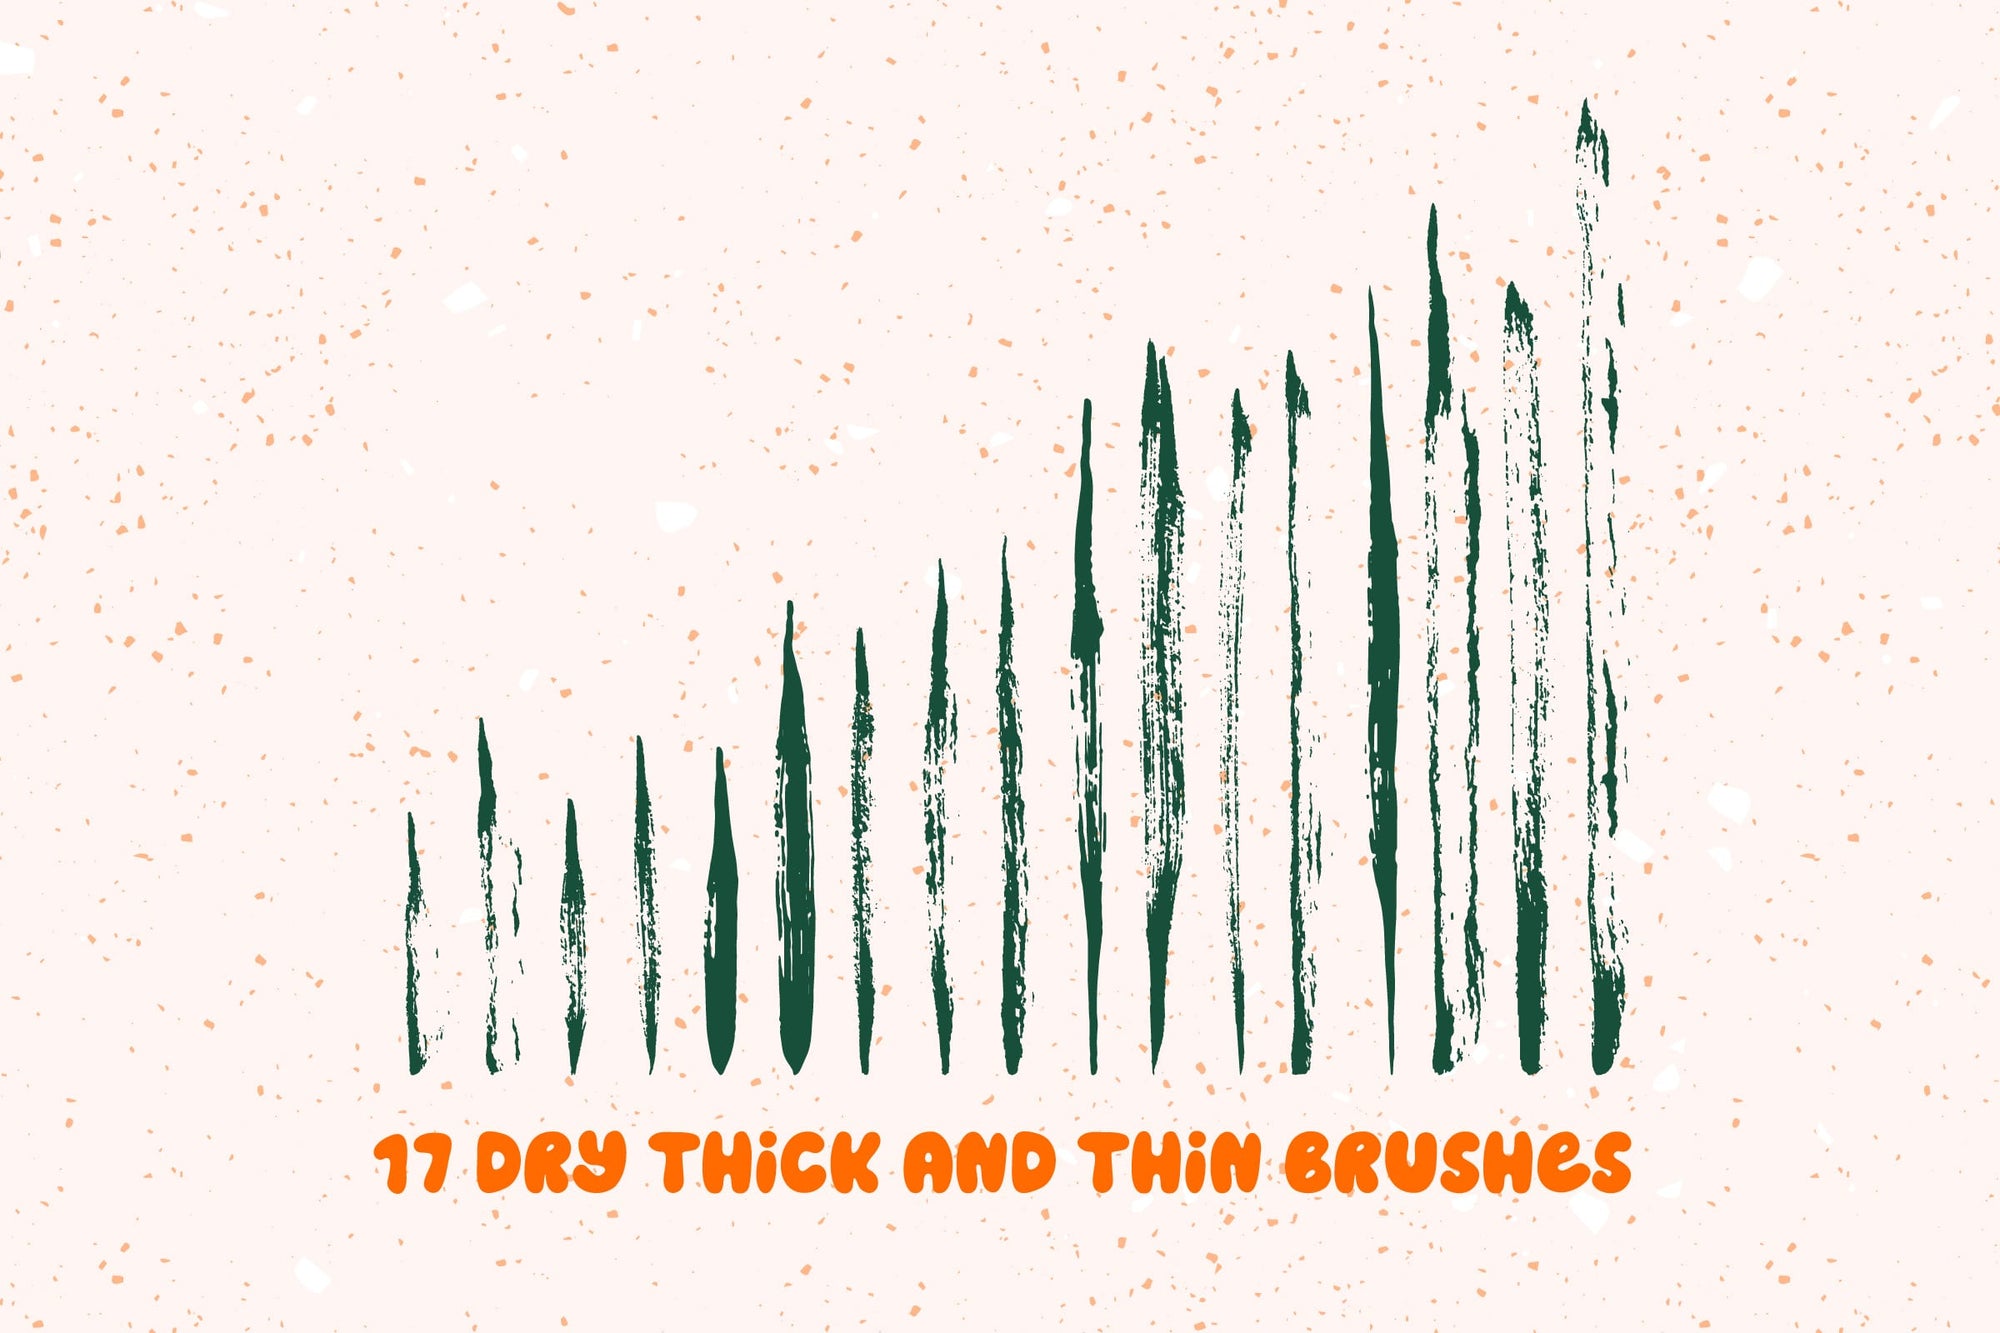 Seventeen vertical Adobe Illustrator Bristles and Strokes brushes in varying thicknesses, depicted in dark green on a speckled light orange background by Esther Nariyoshi Studio.